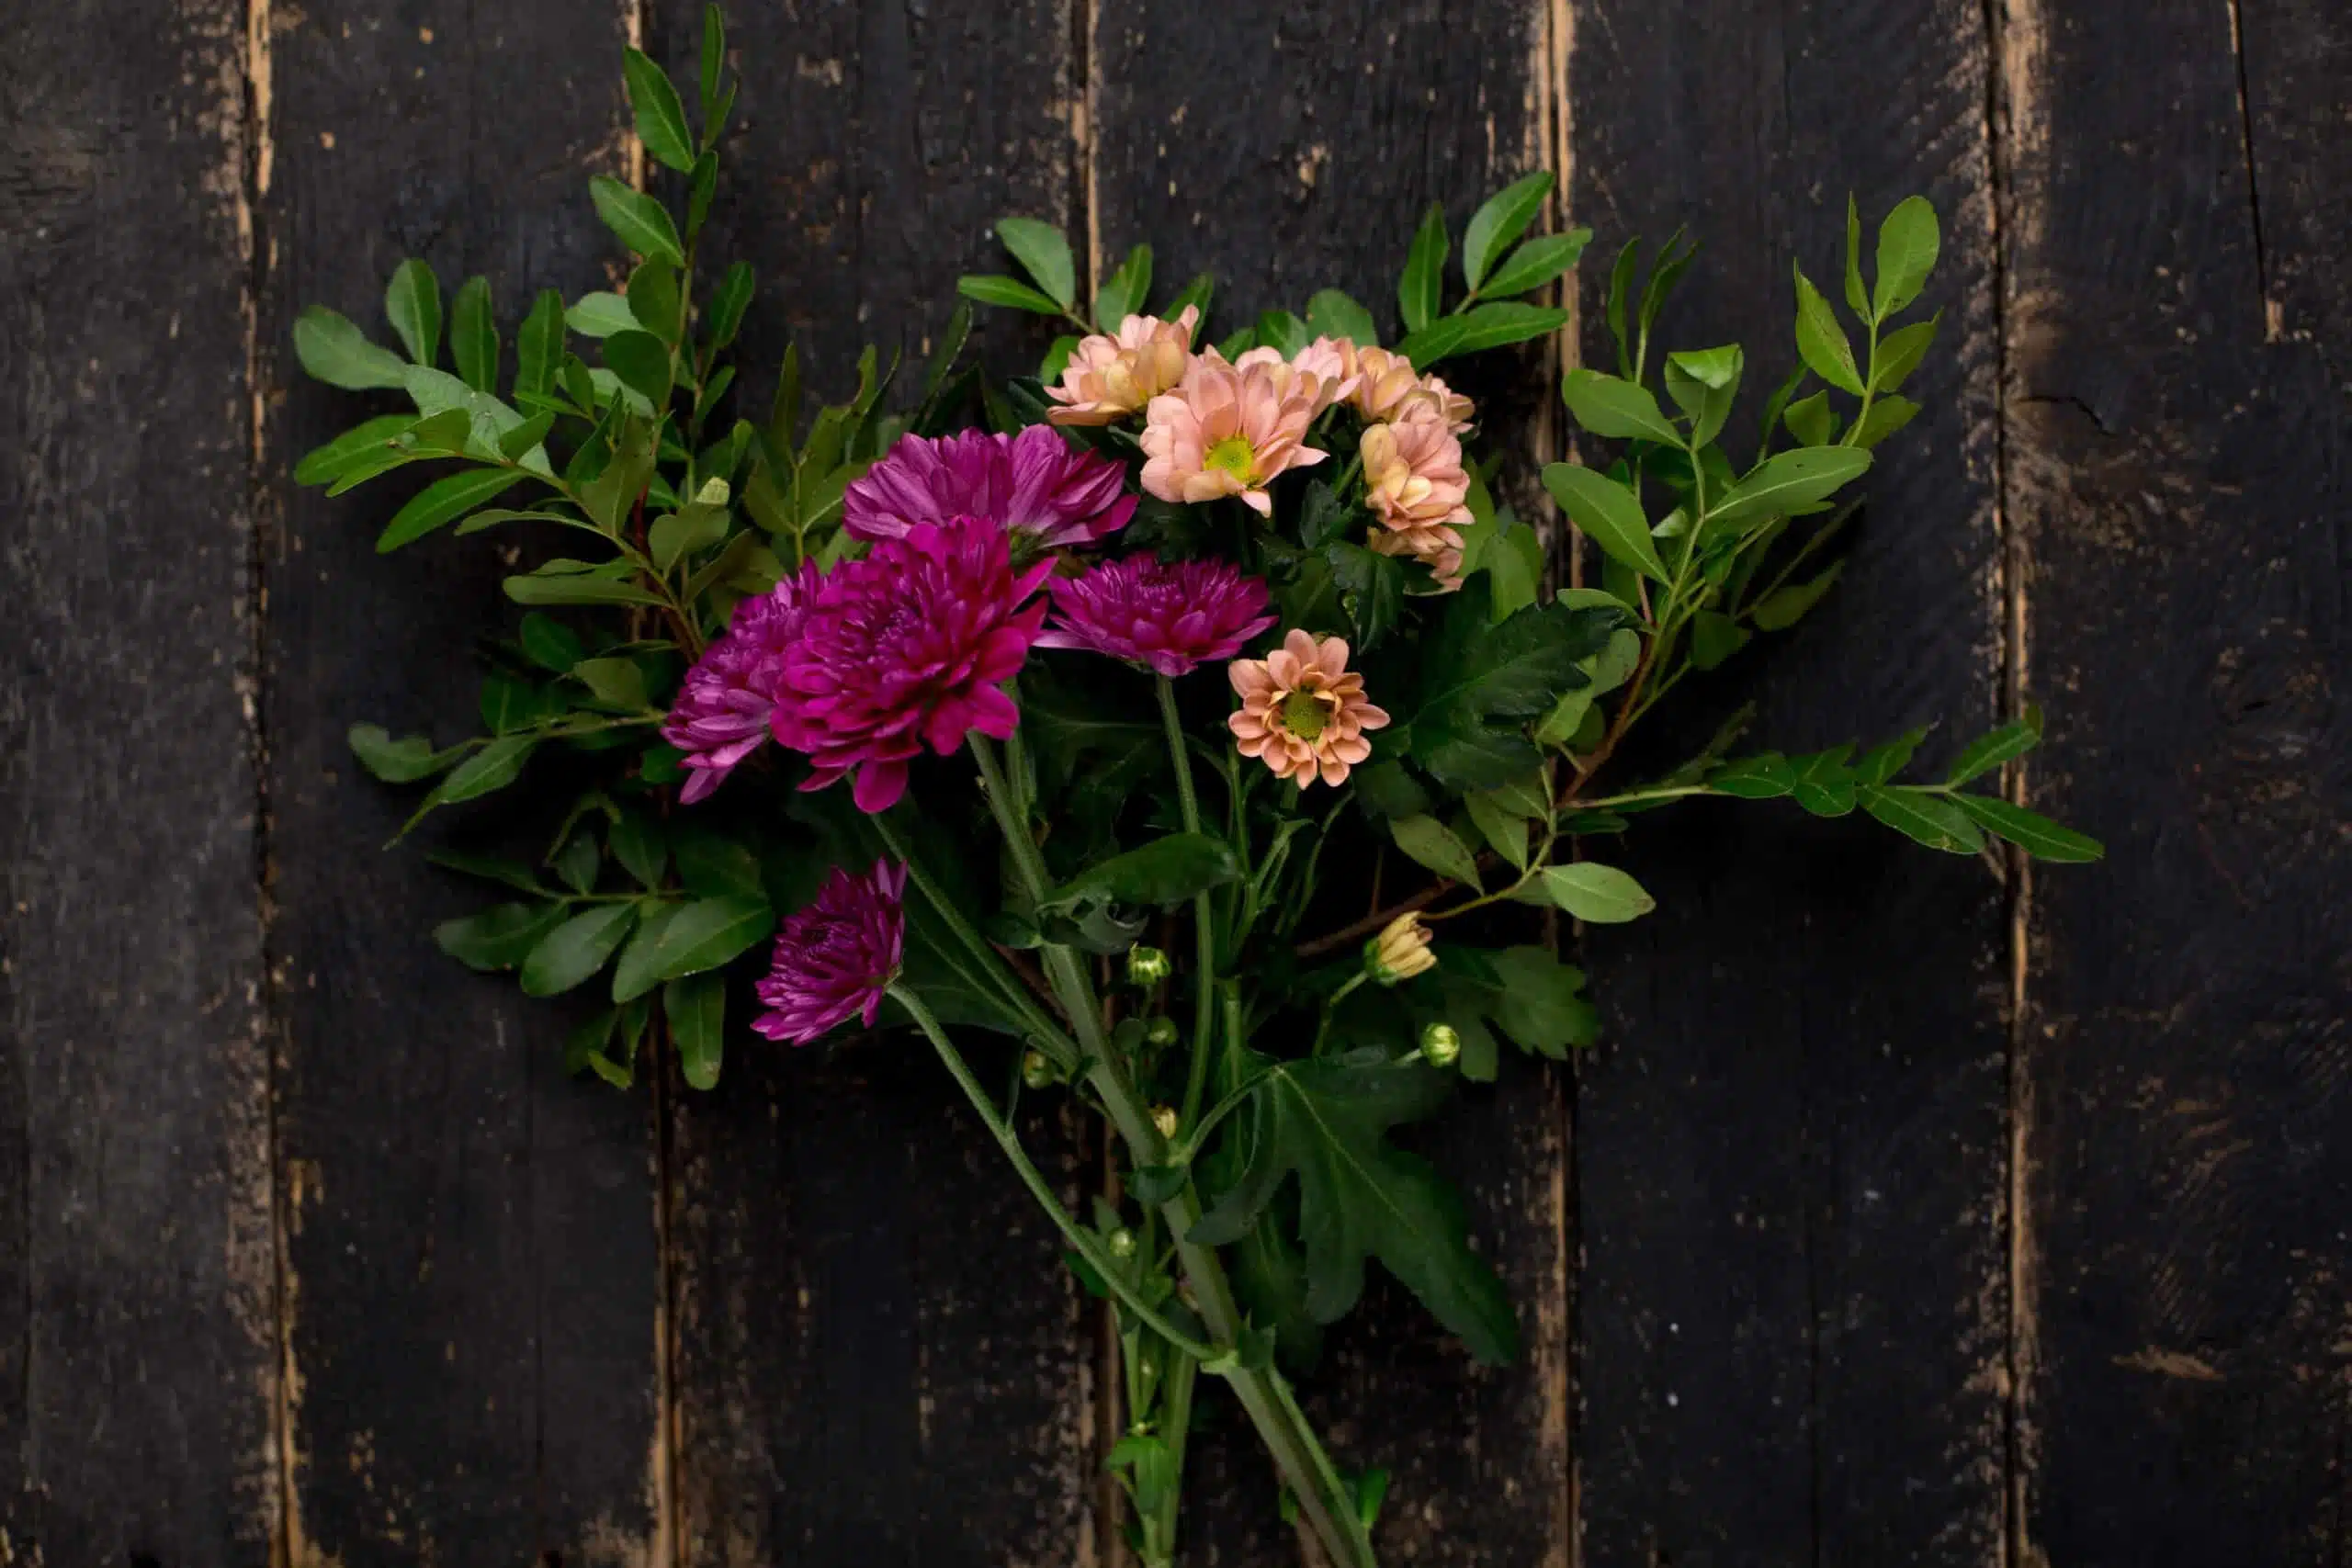 A bouquet on a wooden rustic background.